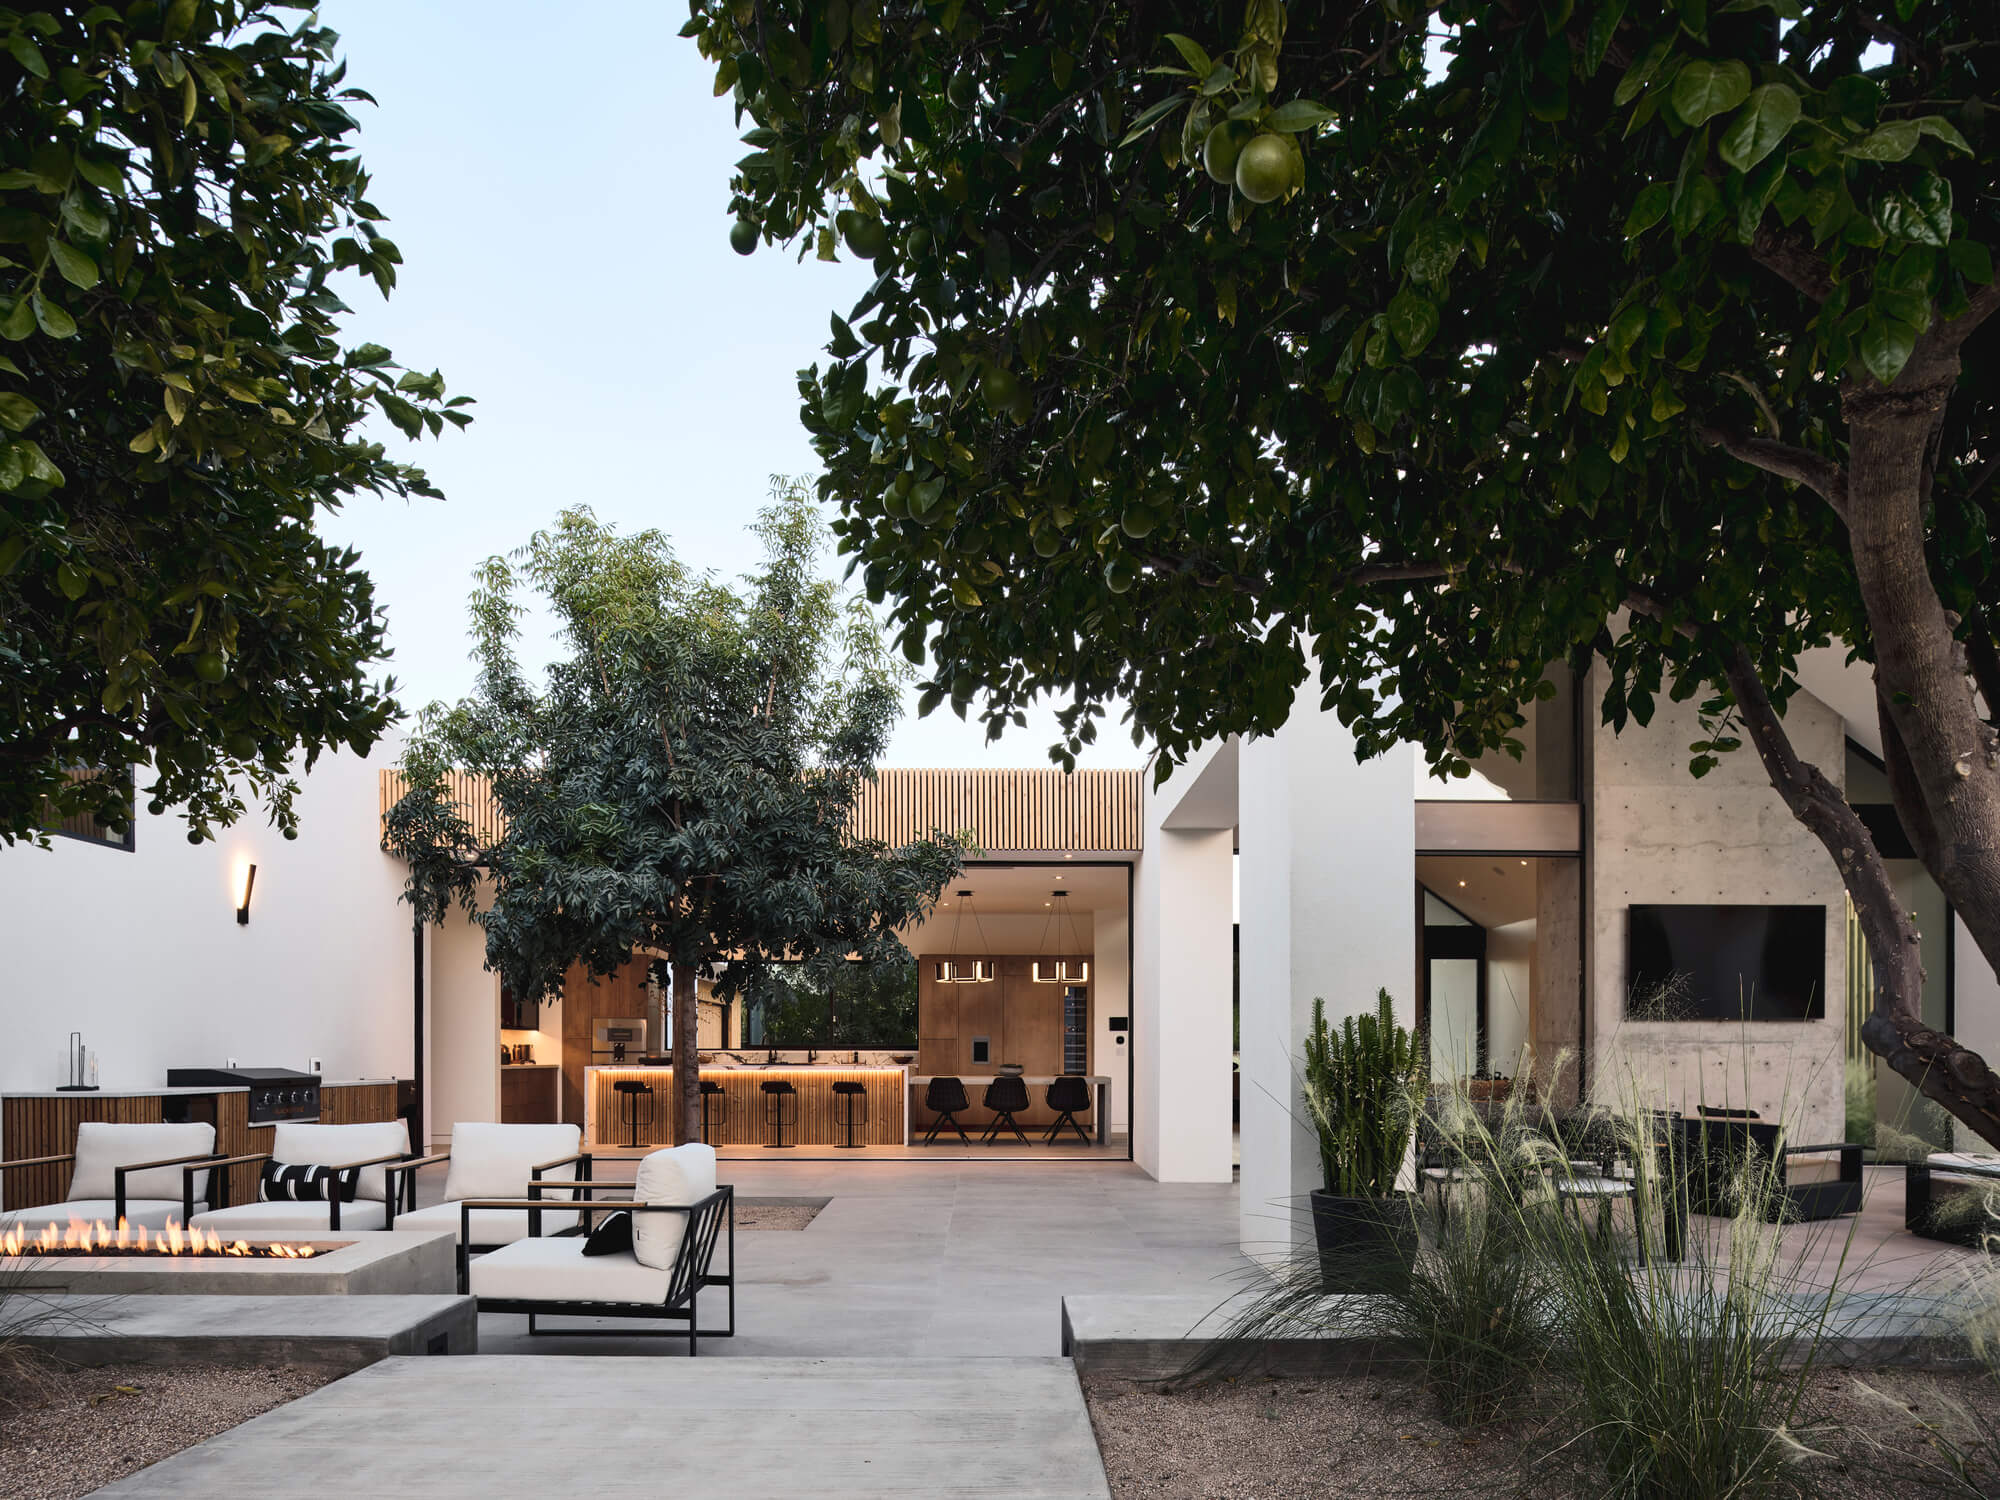 The building stretches to direct residents and guests into the courtyard plan of the central communal area